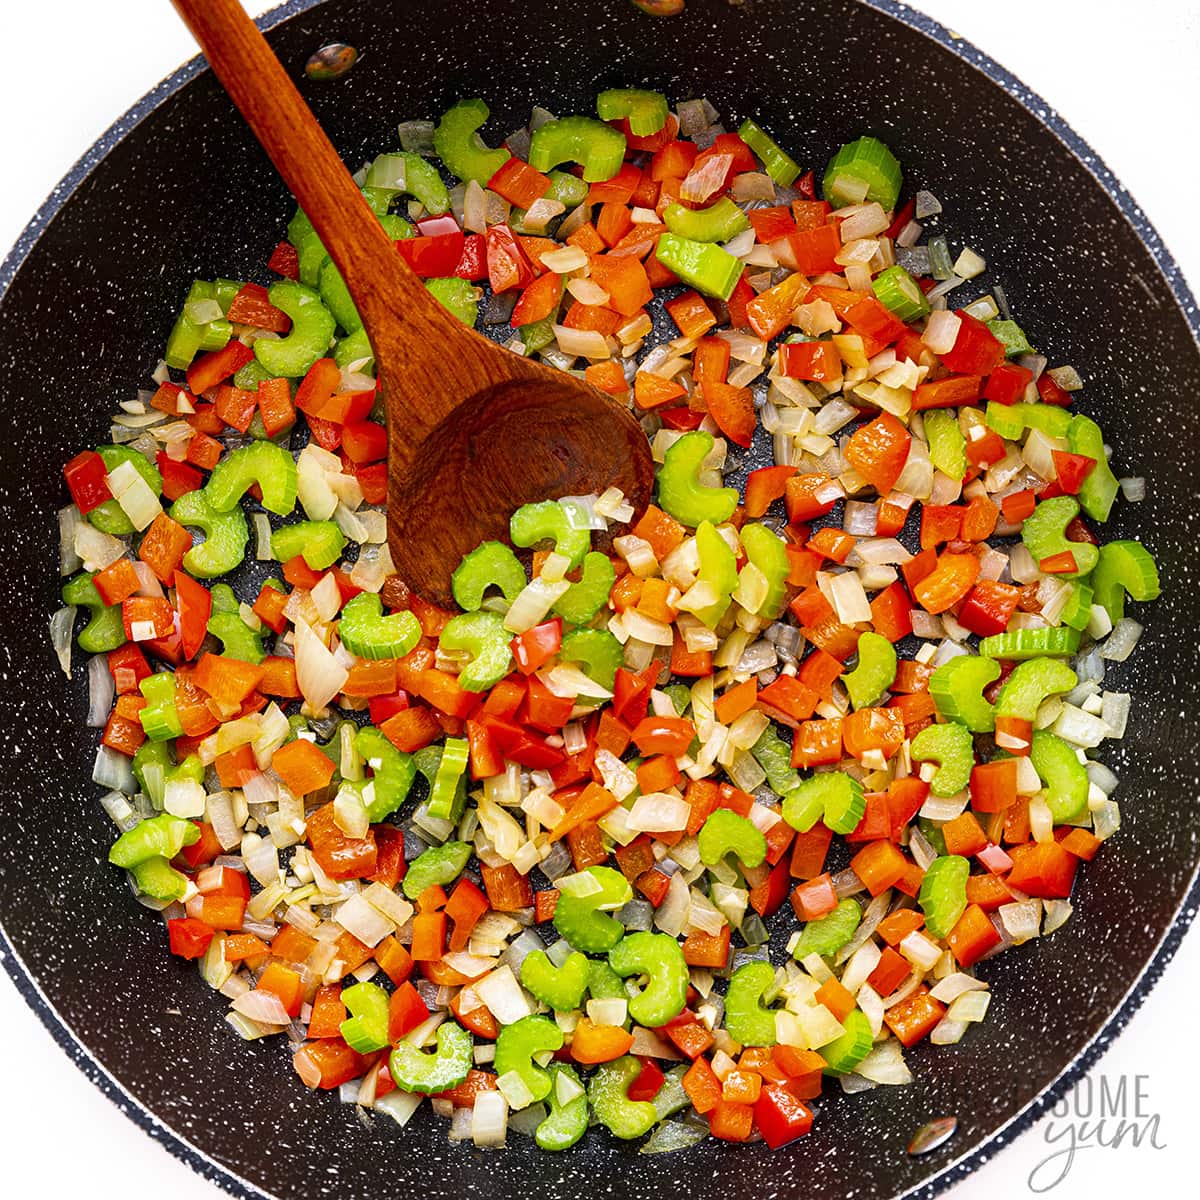  Veggies being sauteed in a skillet.